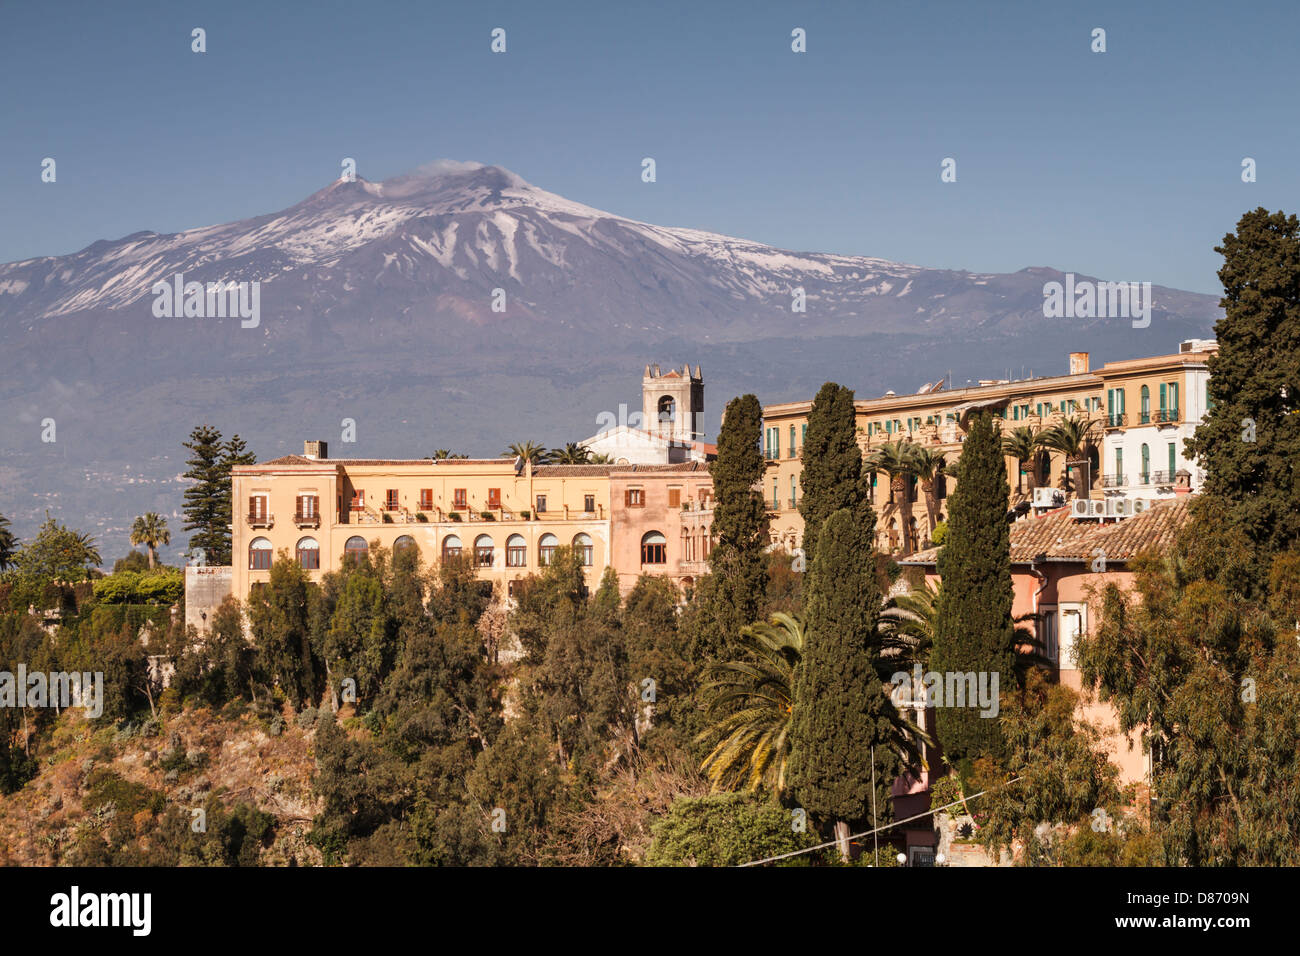 The town of Taormina with Mount Etna volcano, Sicily. Stock Photo